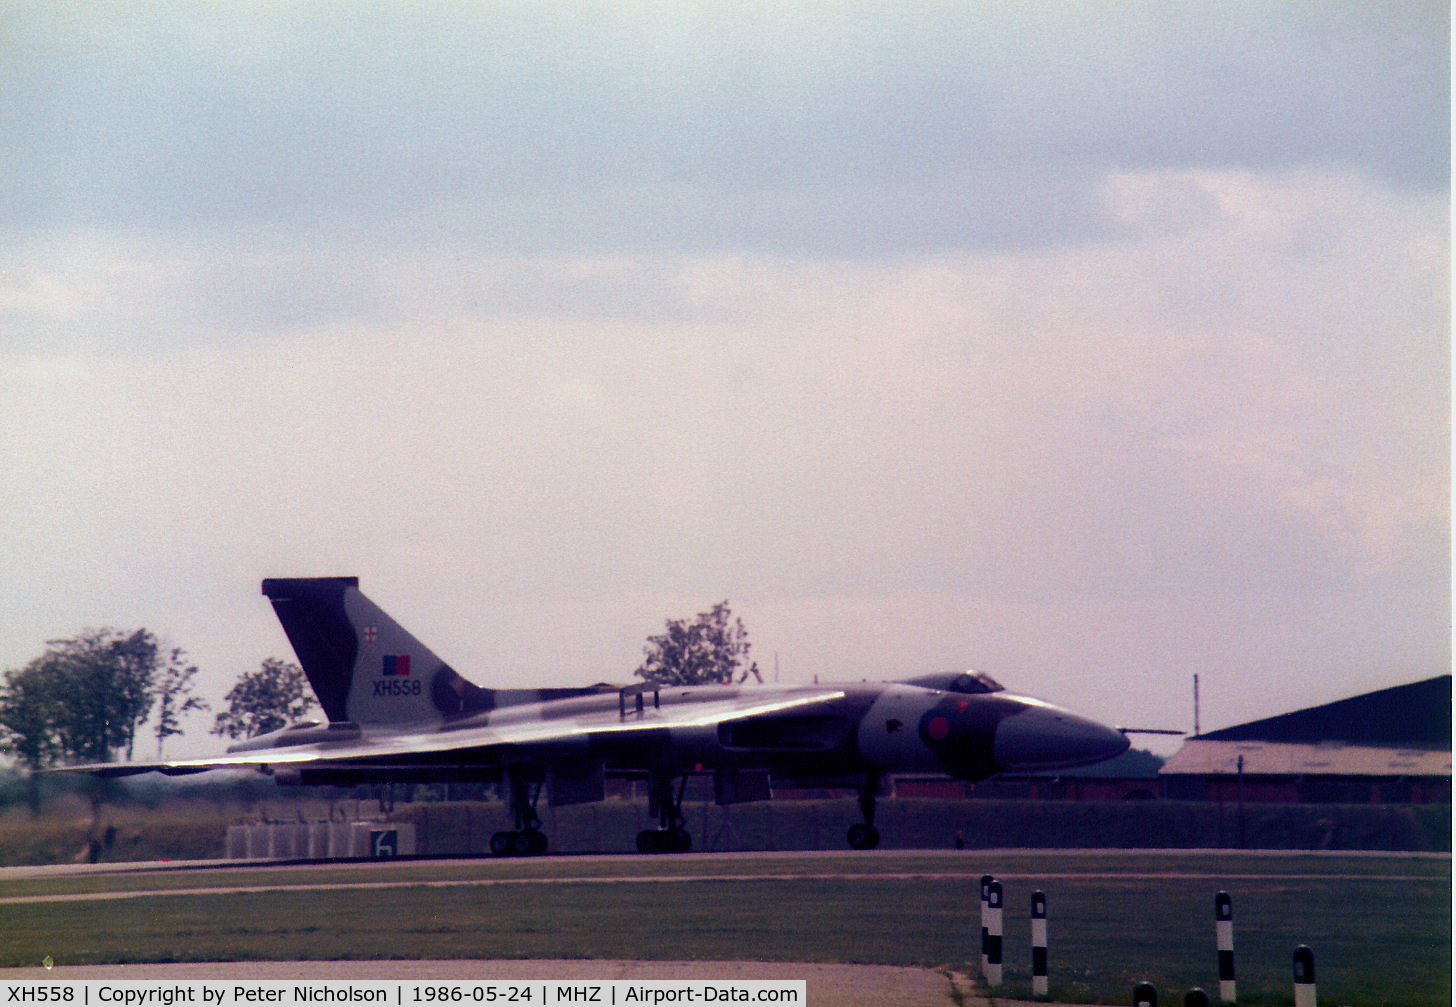 XH558, 1960 Avro Vulcan B.2 C/N Set 12, The 1986 RAF Mildenhall Air Fete was the first season for the Vulcan Display Flight and until 1992 this Vulcan was the RAF display aircraft.